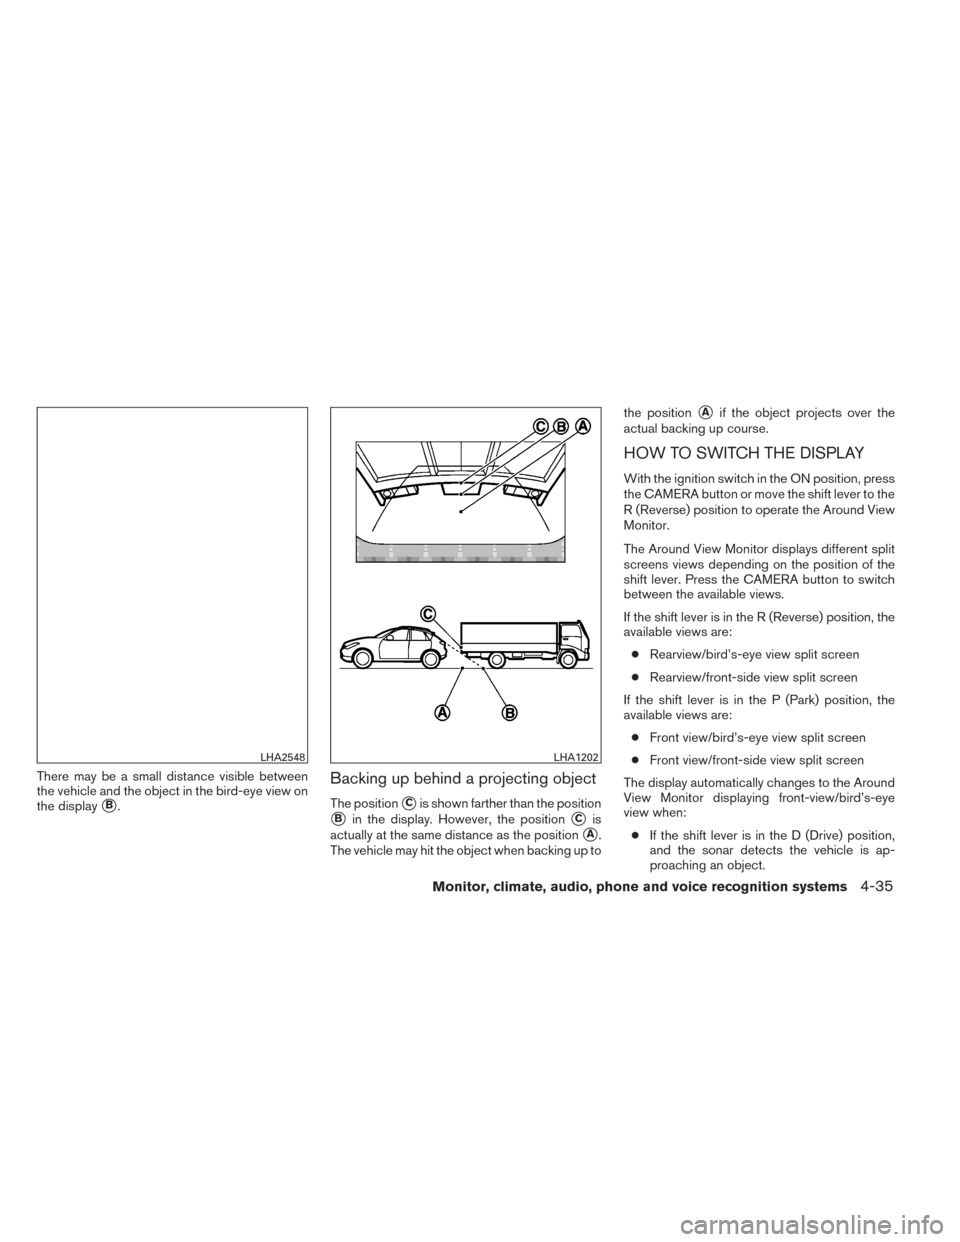 NISSAN PATHFINDER HYBRID 2014 R52 / 4.G Owners Manual There may be a small distance visible between
the vehicle and the object in the bird-eye view on
the display
B.
Backing up behind a projecting object
The positionCis shown farther than the position
